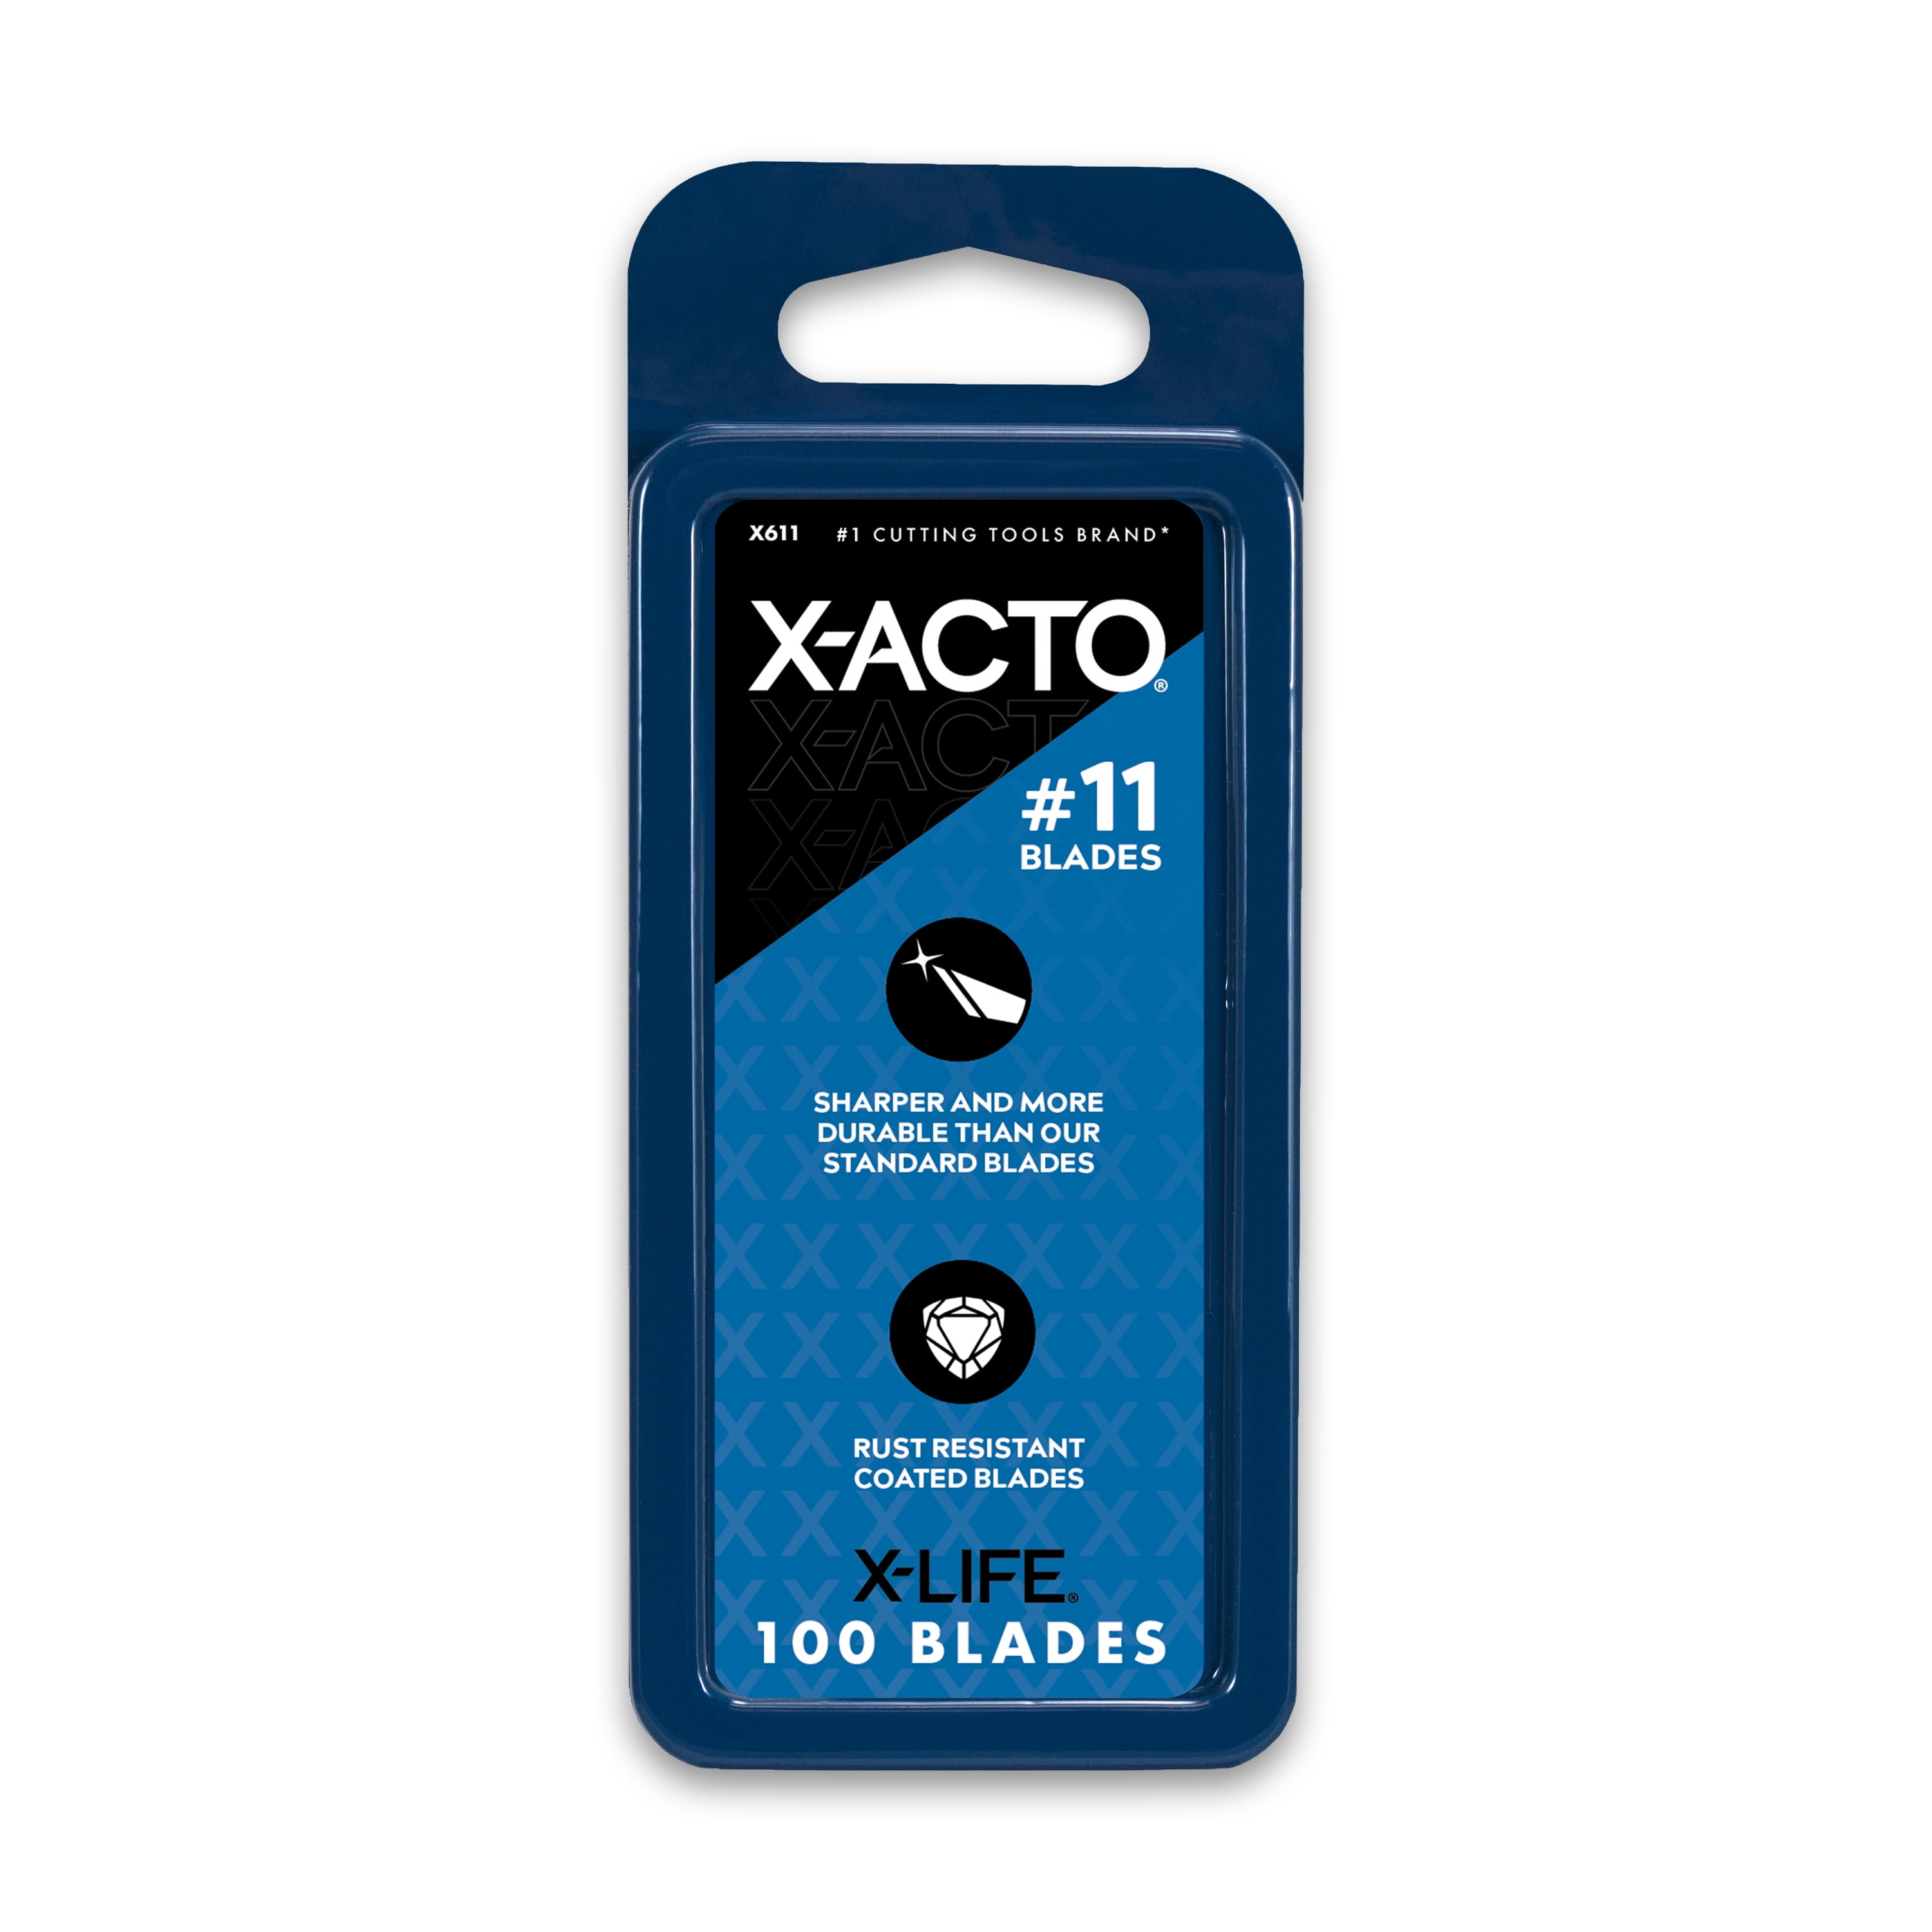 X-ACTO No 11 Carbon Steel Hobby Utility Razor Blade(100-Pack) at